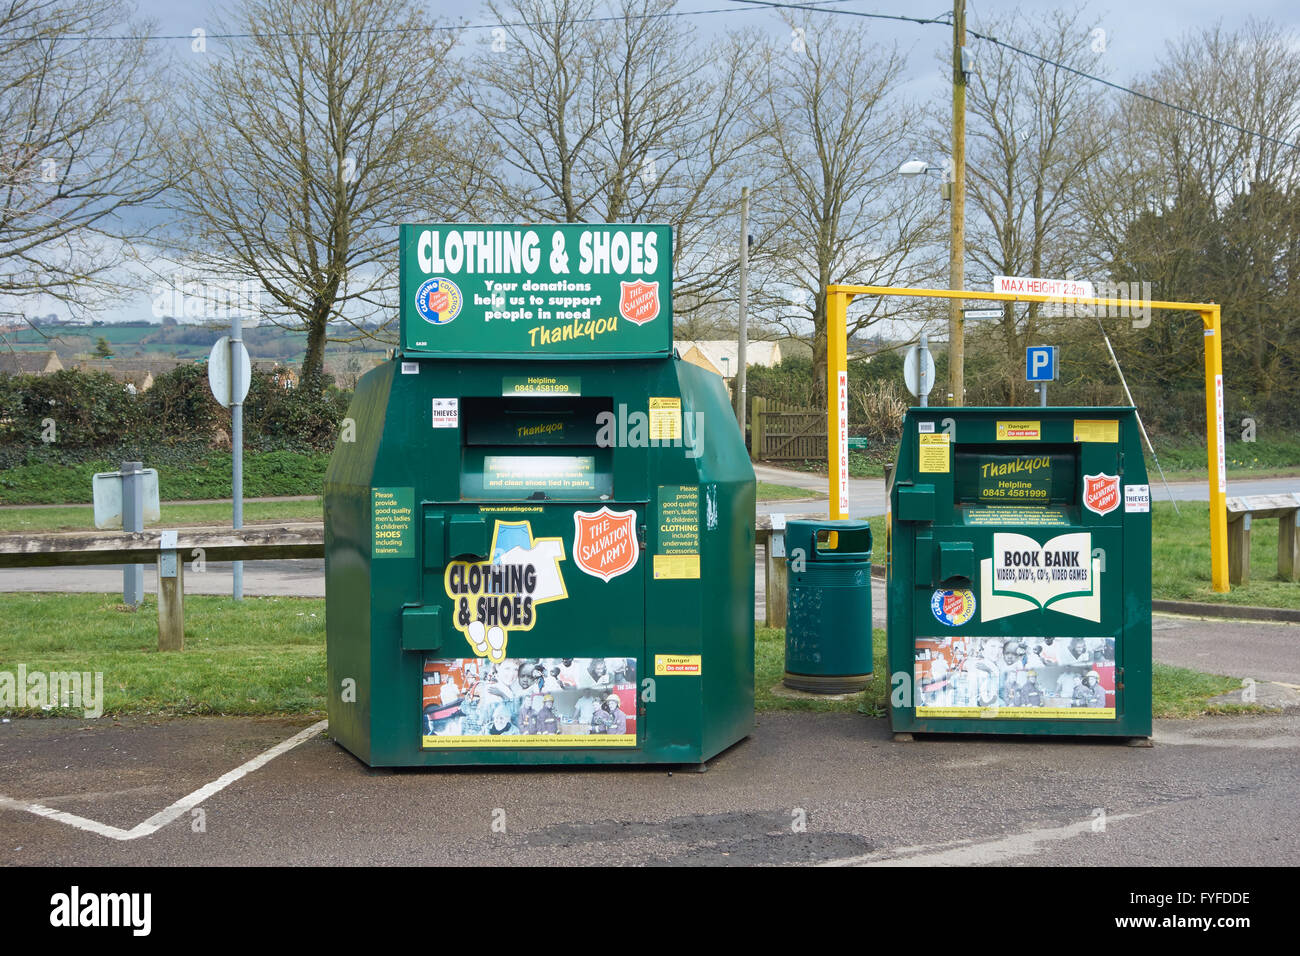 Why OPEN A Clothes Bin Recycling Franchise